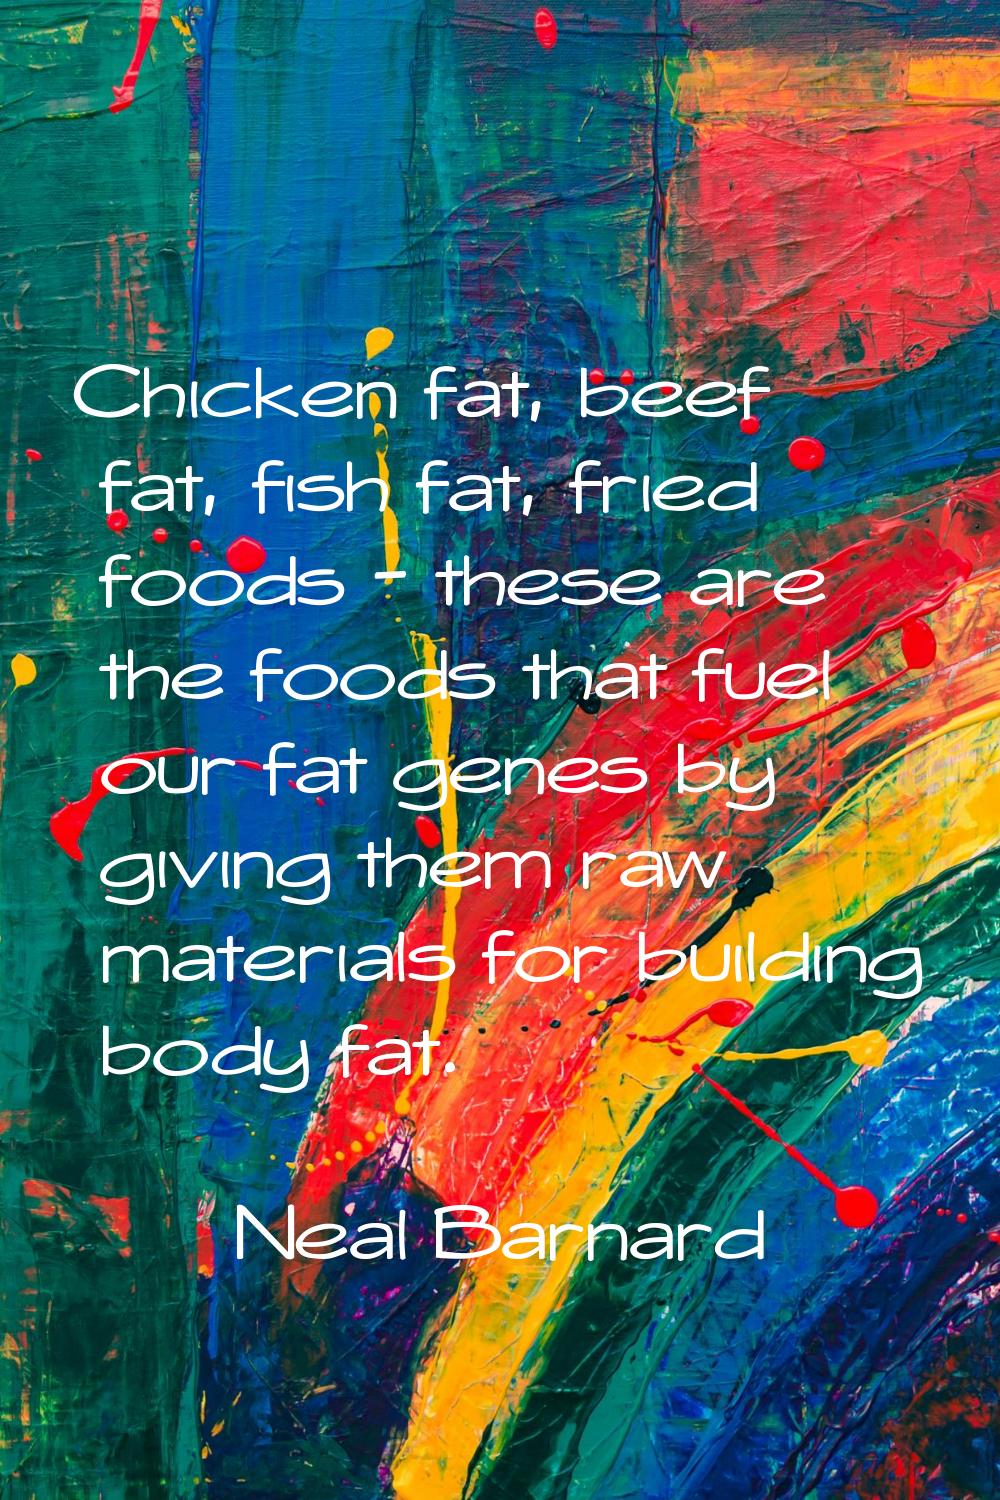 Chicken fat, beef fat, fish fat, fried foods - these are the foods that fuel our fat genes by givin